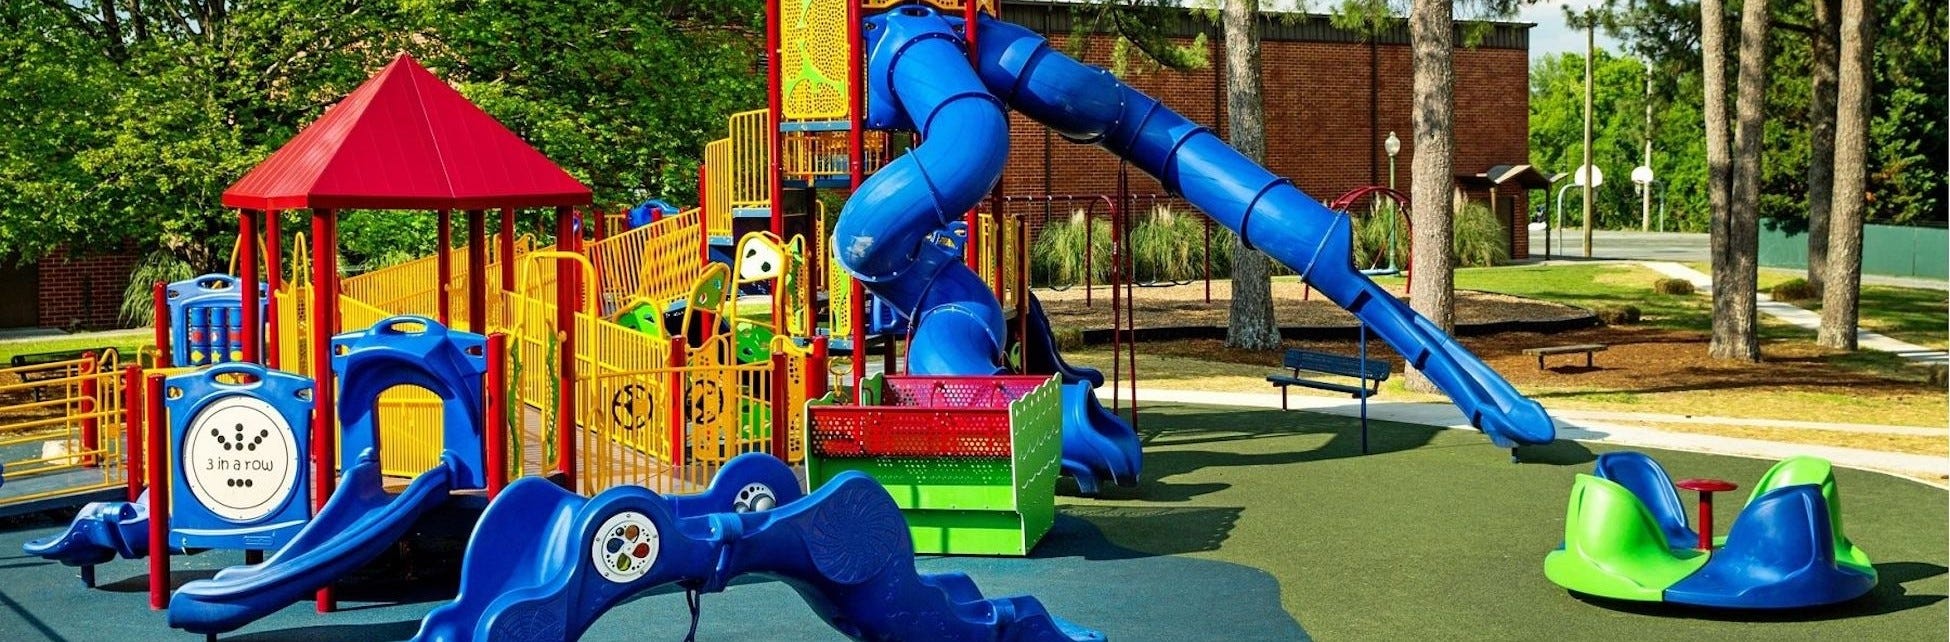 How Can I Find Funding for a New Playground?